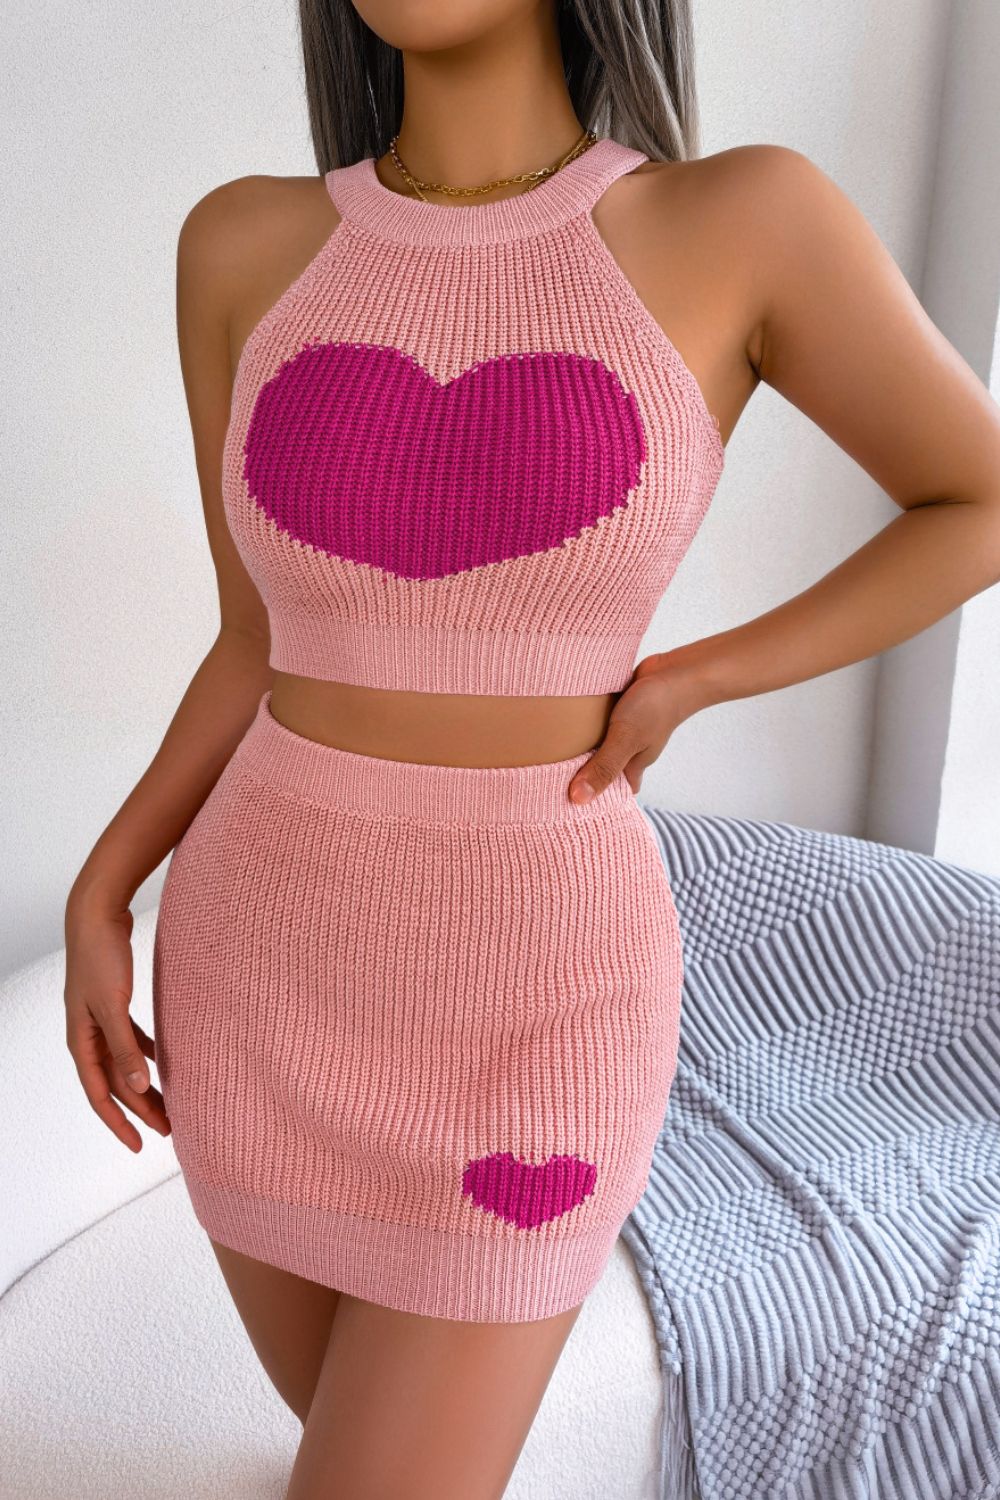 Heart Contrast Ribbed Sleeveless Knit Top and Skirt Set - Guy Christopher